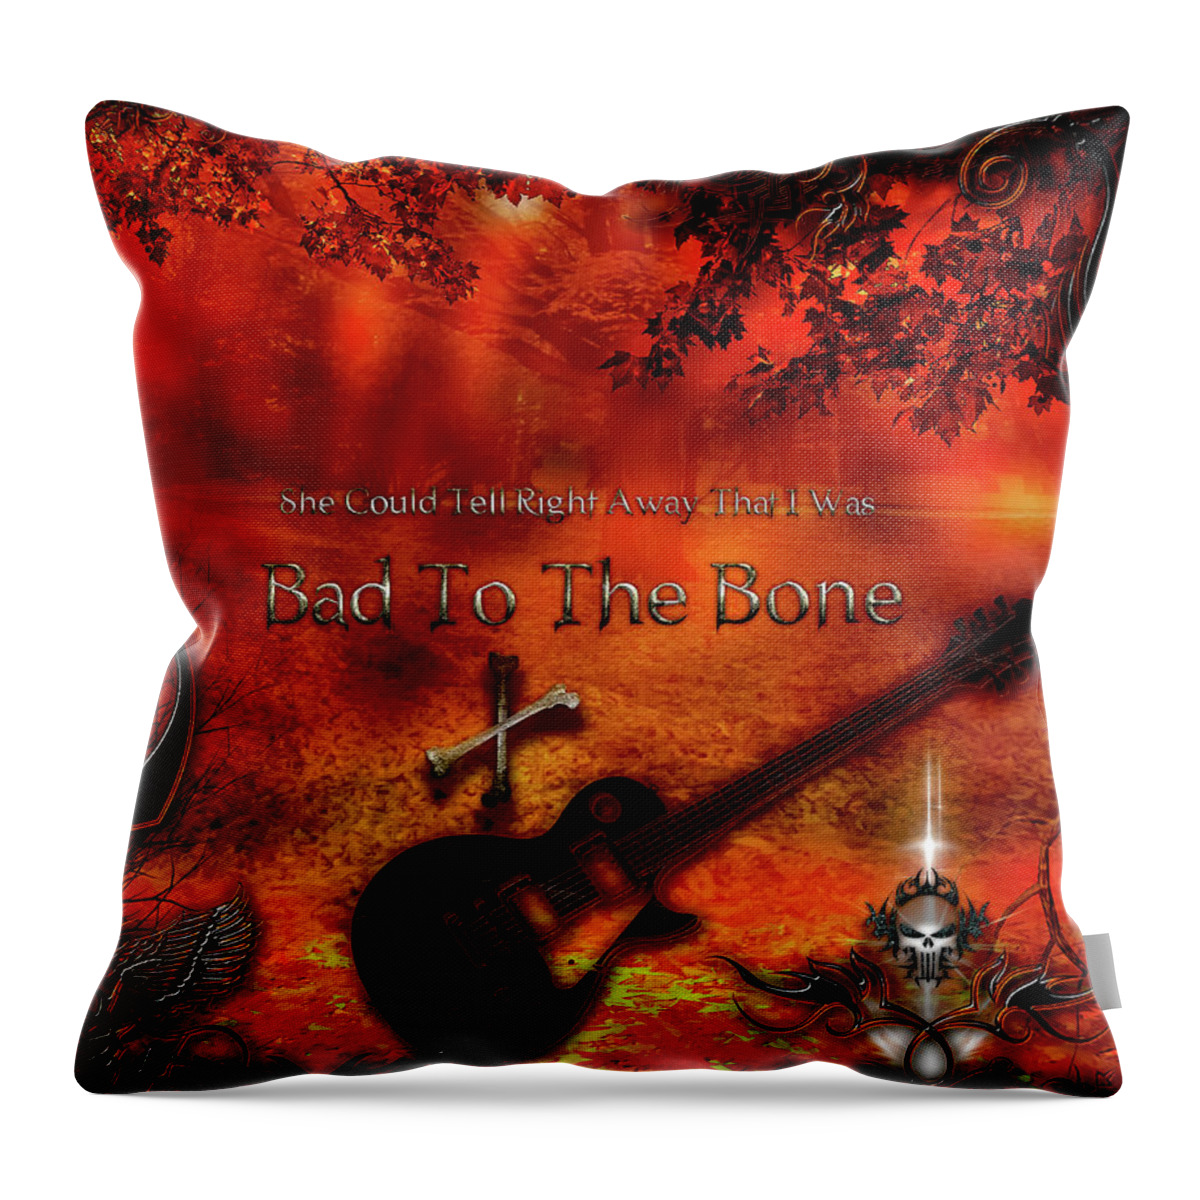 Bad To The Bone Throw Pillow featuring the digital art Bad To The Bone by Michael Damiani